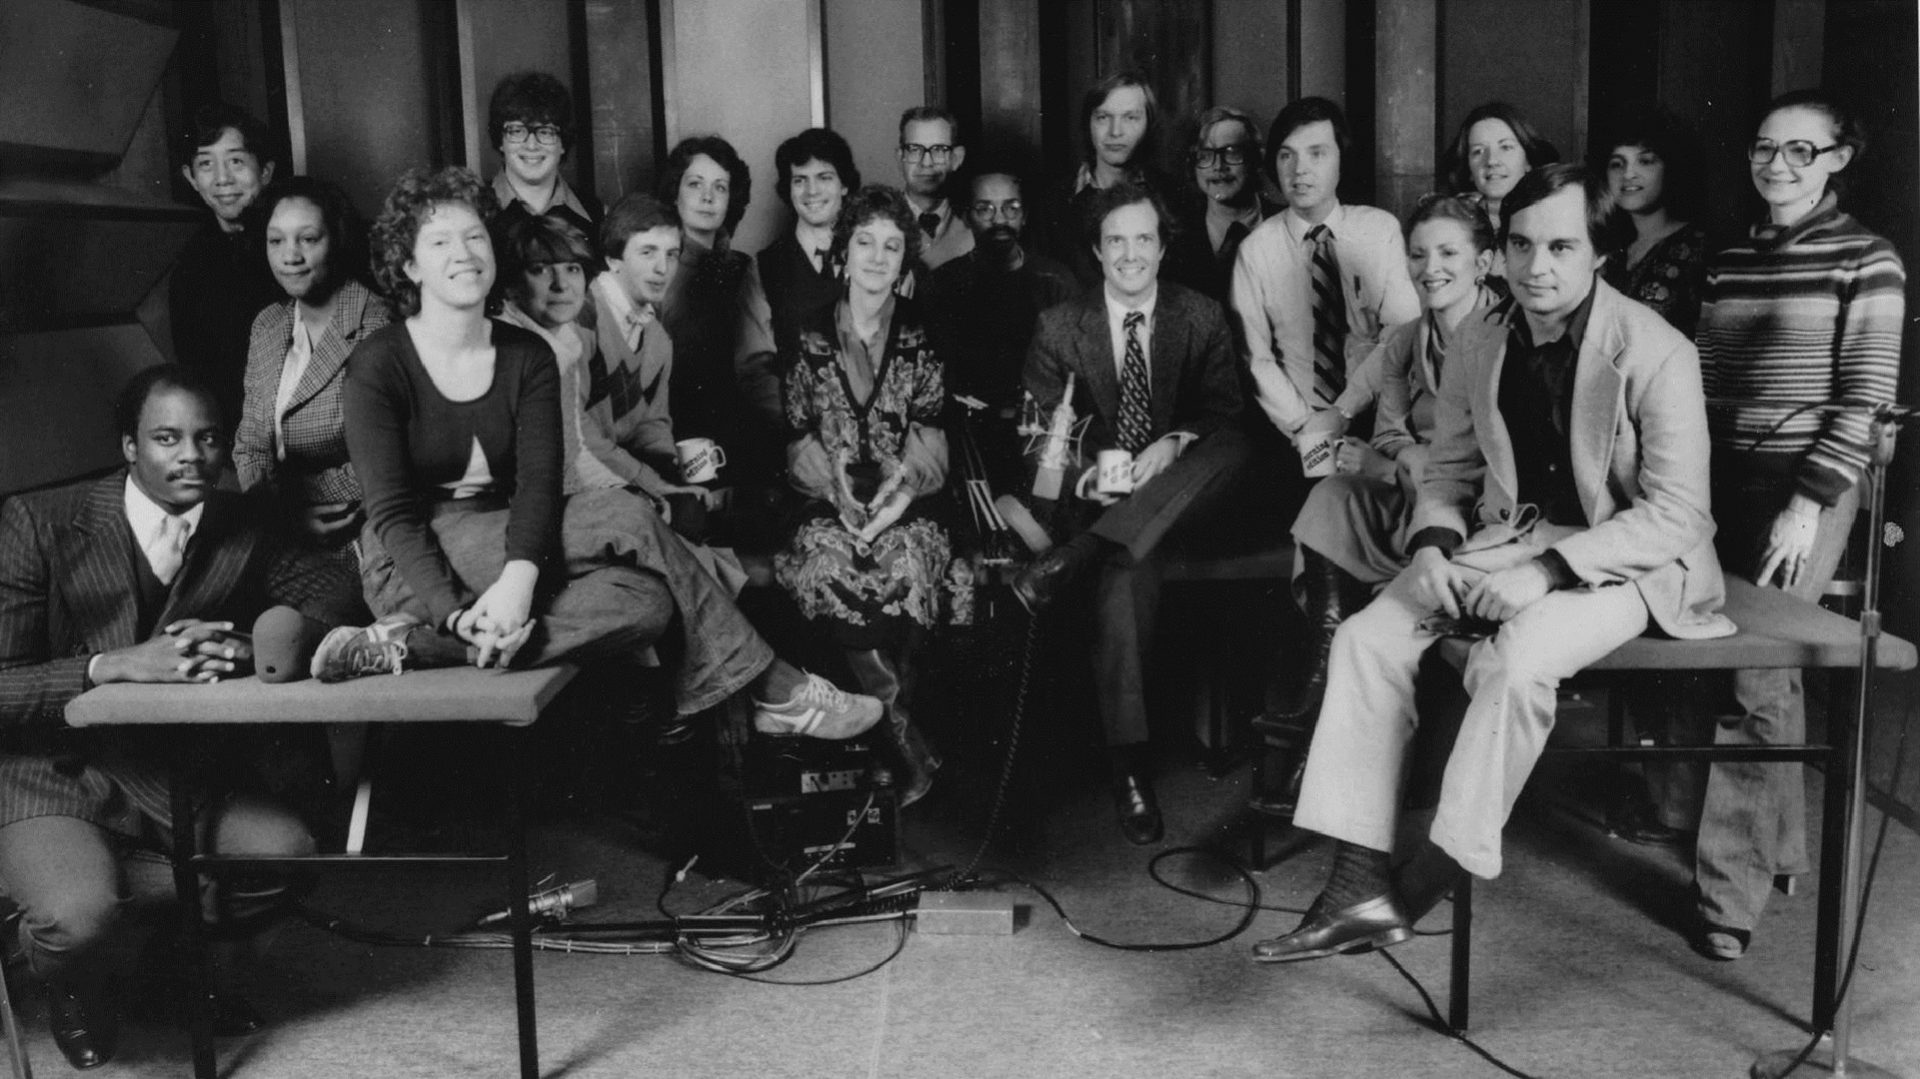 A staff photo taken during the early days of Morning Edition. Co-host Bob Edwards is in the back row, standing seventh from the left among the three men in glasses. His co-host, Barbara Hoctor, sits in the front, fourth from the left, between the two men holding mugs. Hoctor left the show after a few weeks. Edwards was host until 2004, when he went to SiriusXM.